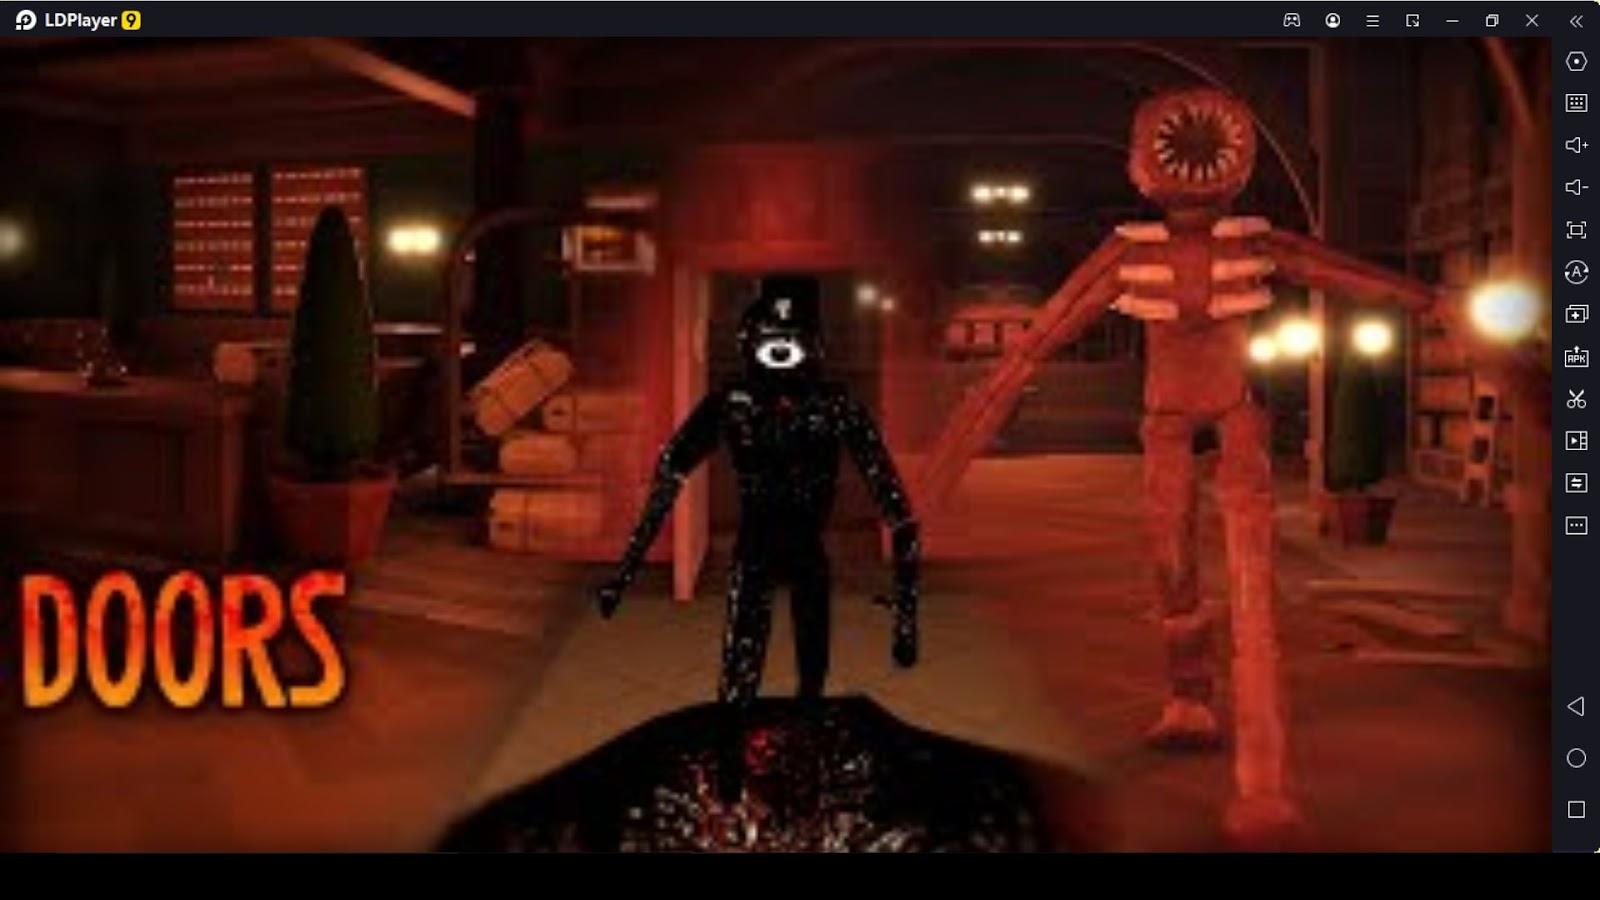 What are some other good horror games on Roblox to record? : r/roblox